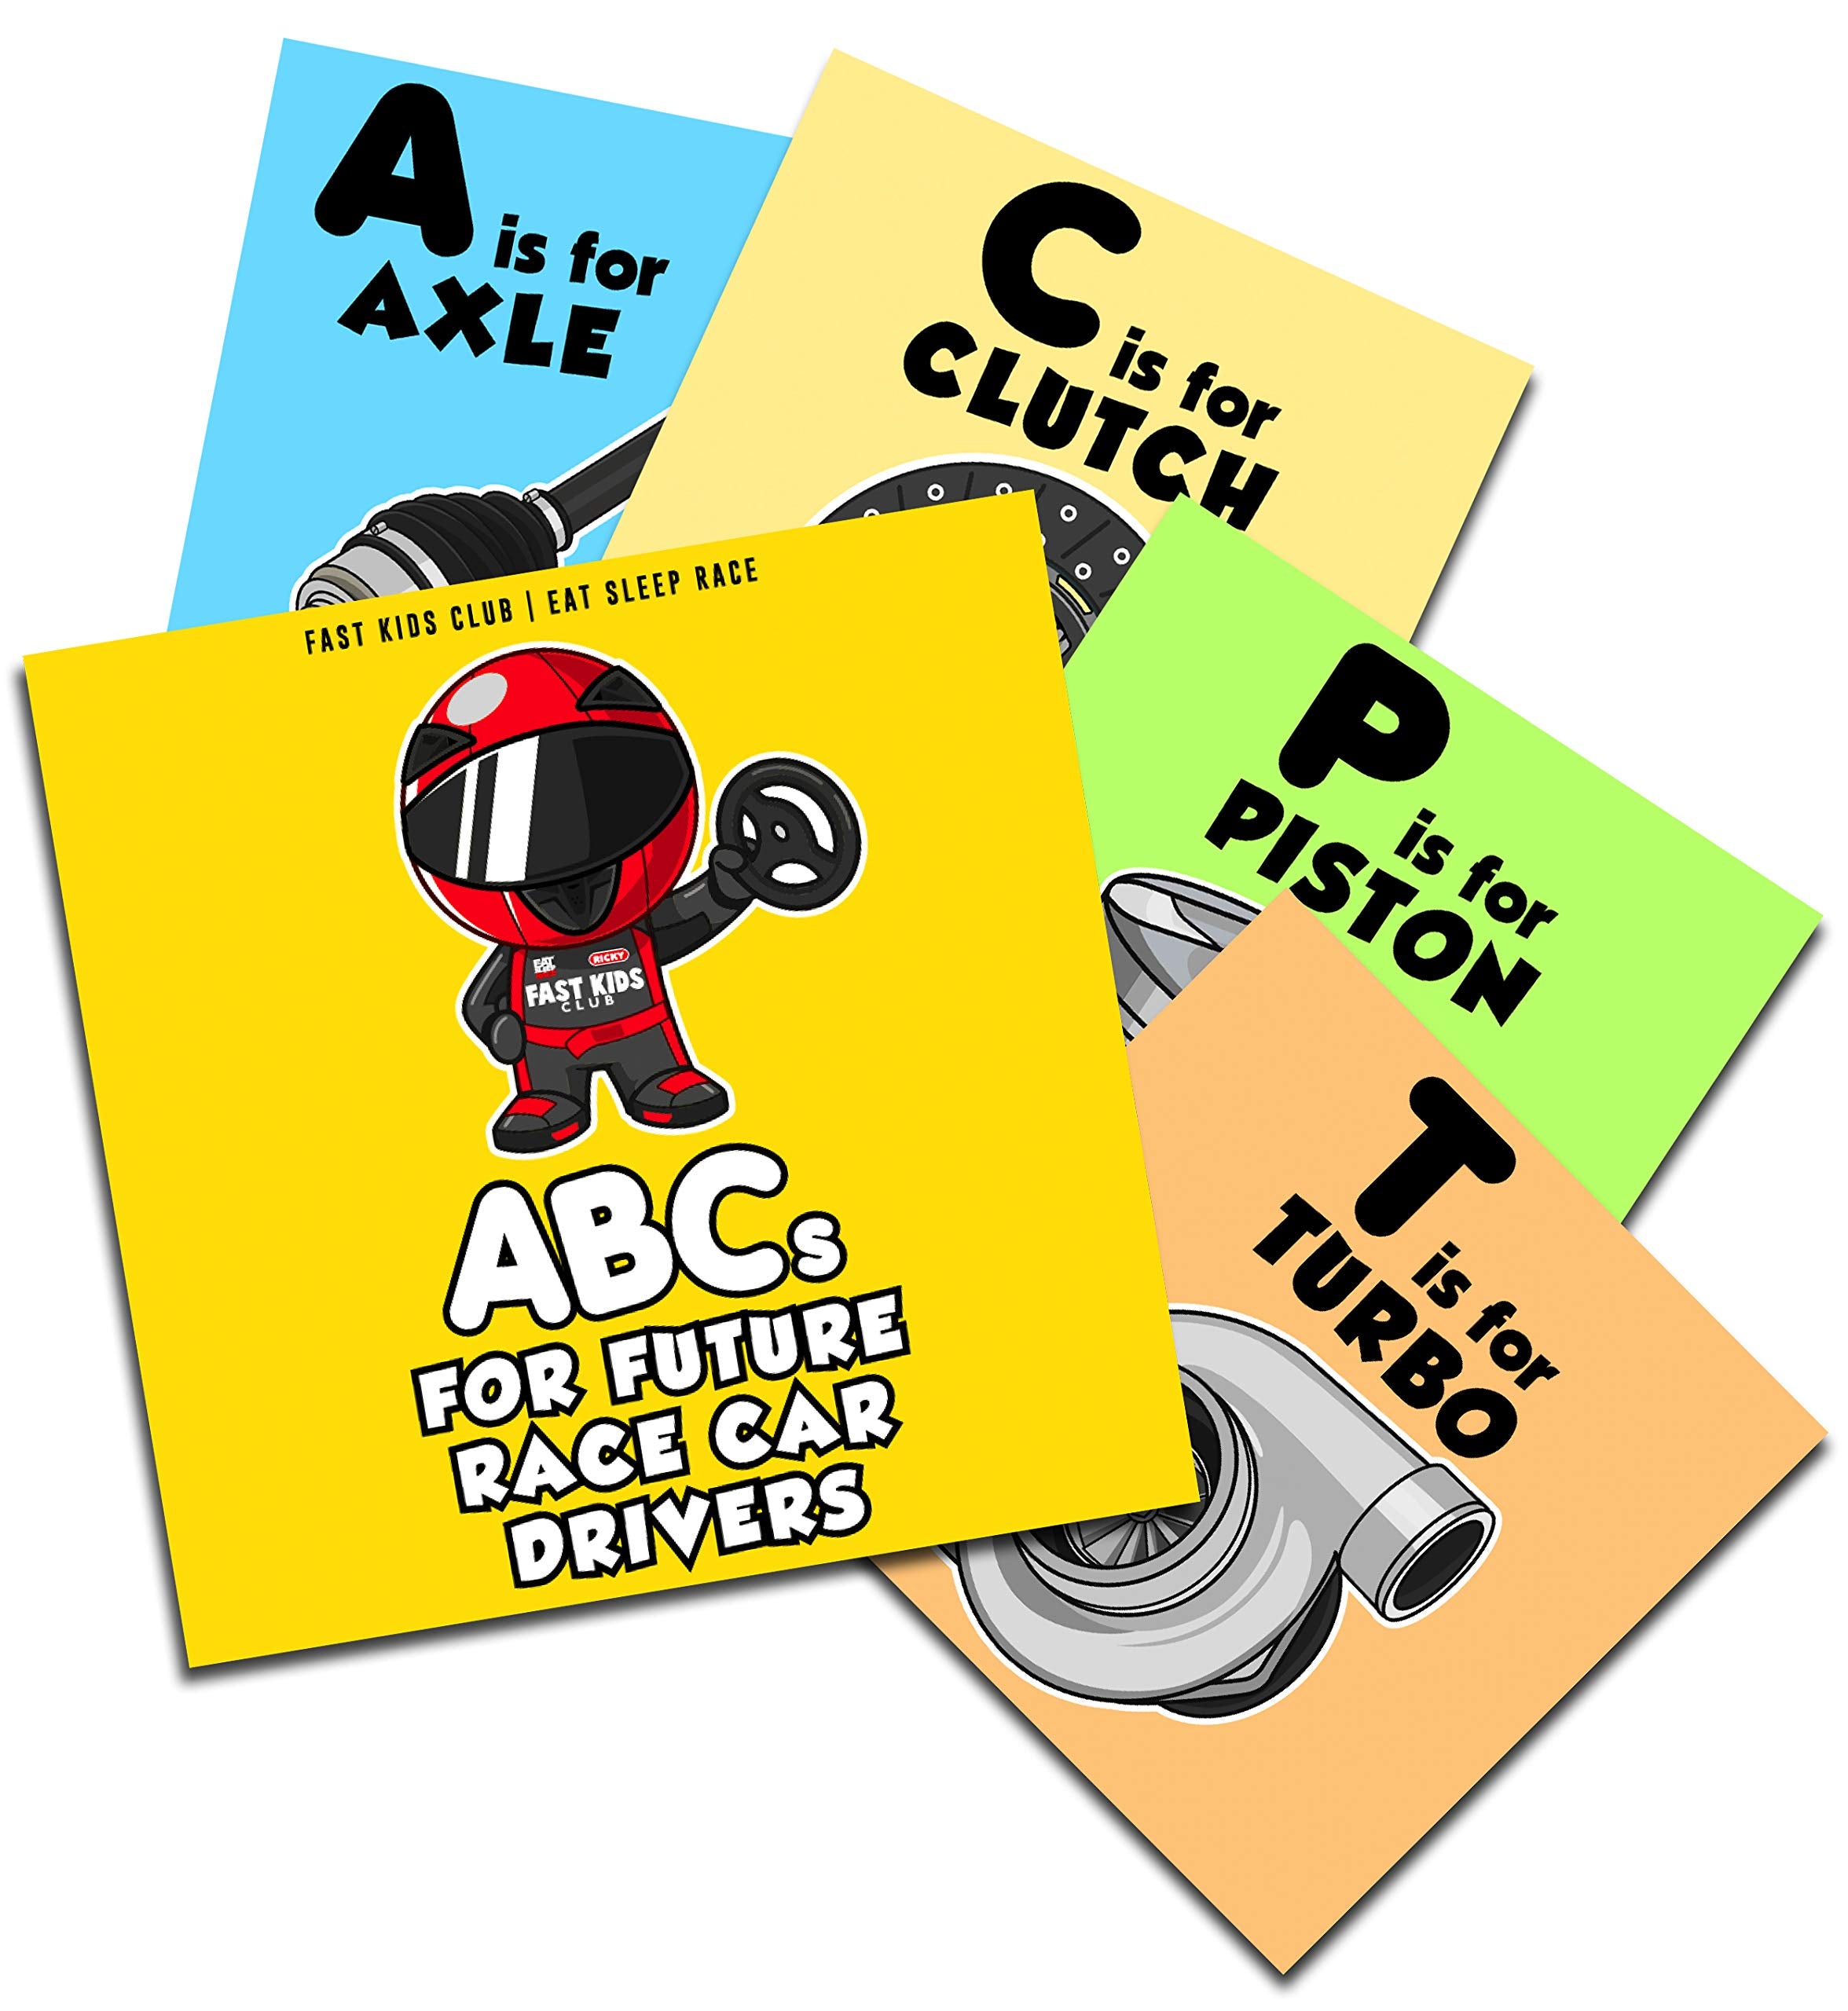 ABCs for Future Race Car Drivers by Club, Fast K.